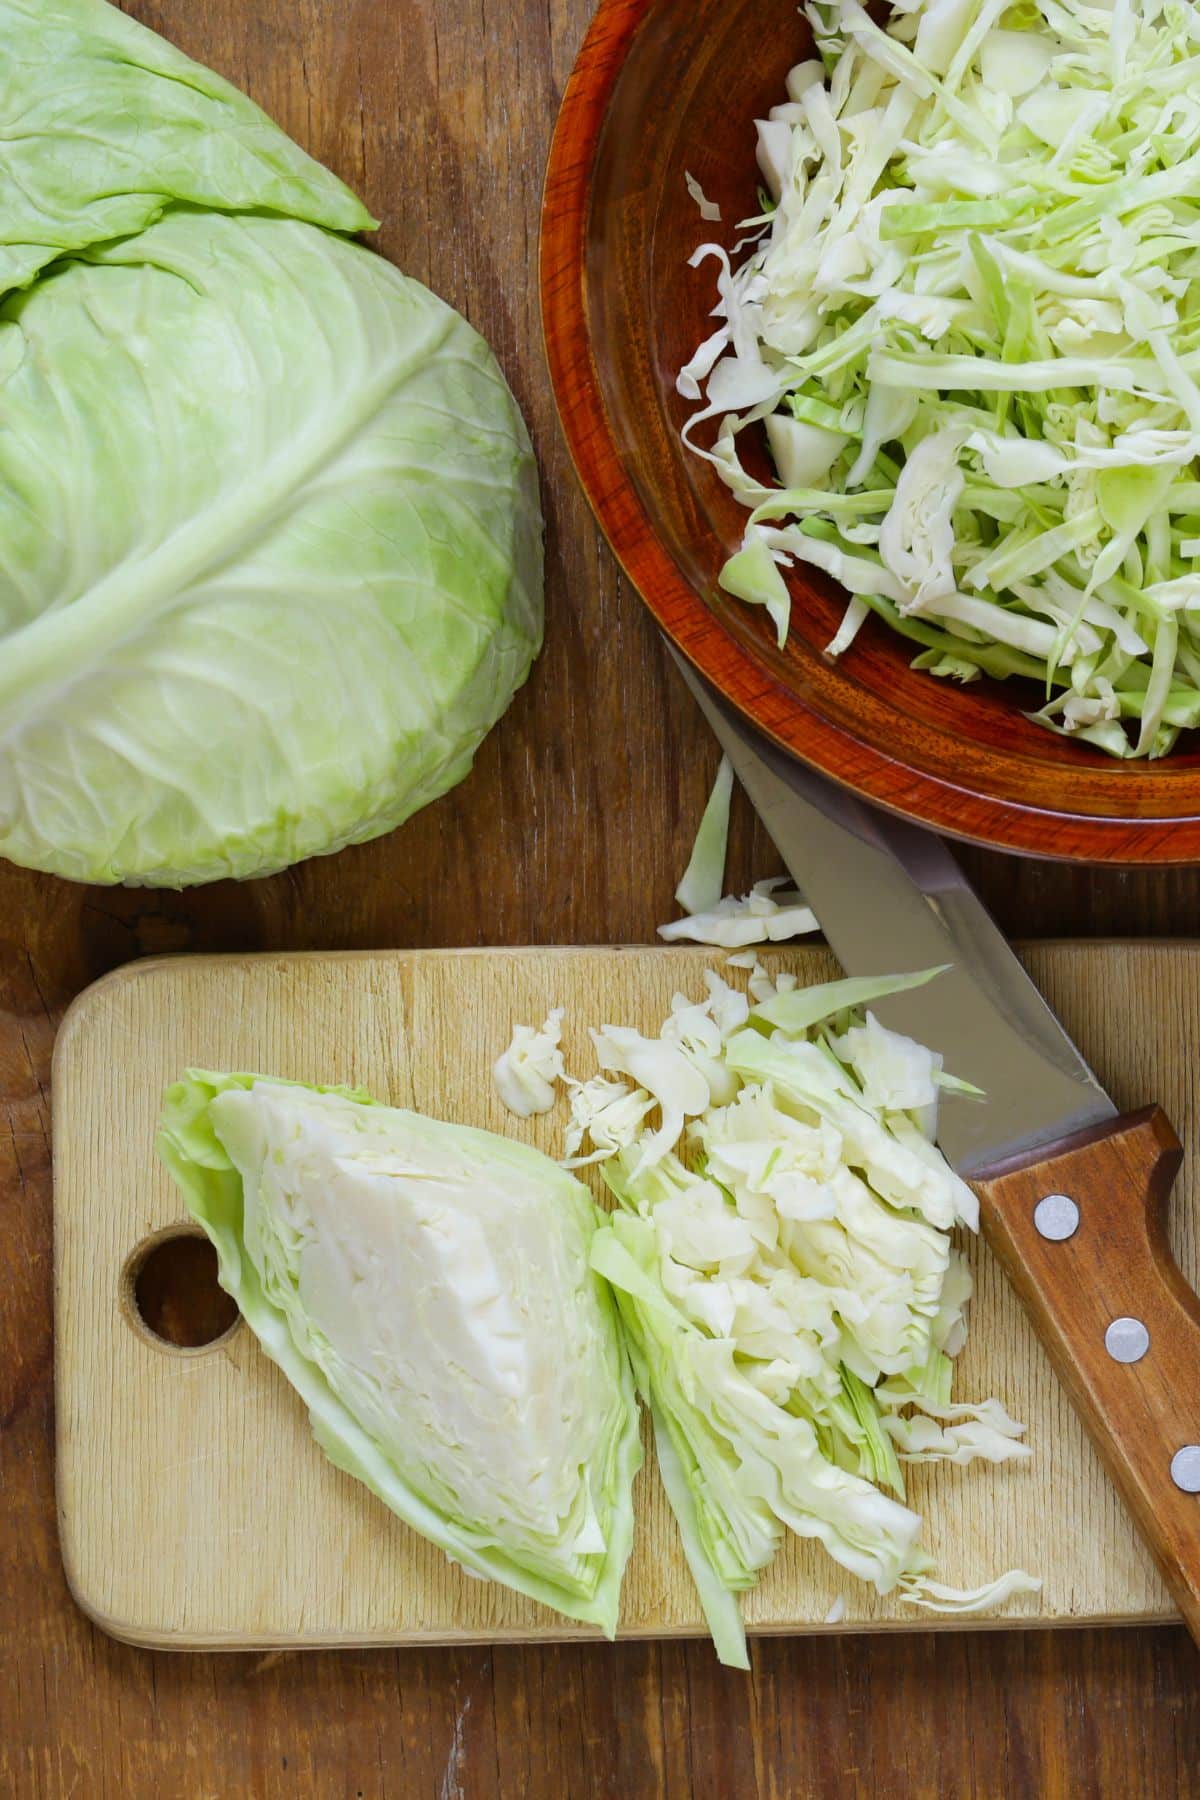 Halved and Sliced cabbage in bowl and on wooden board.